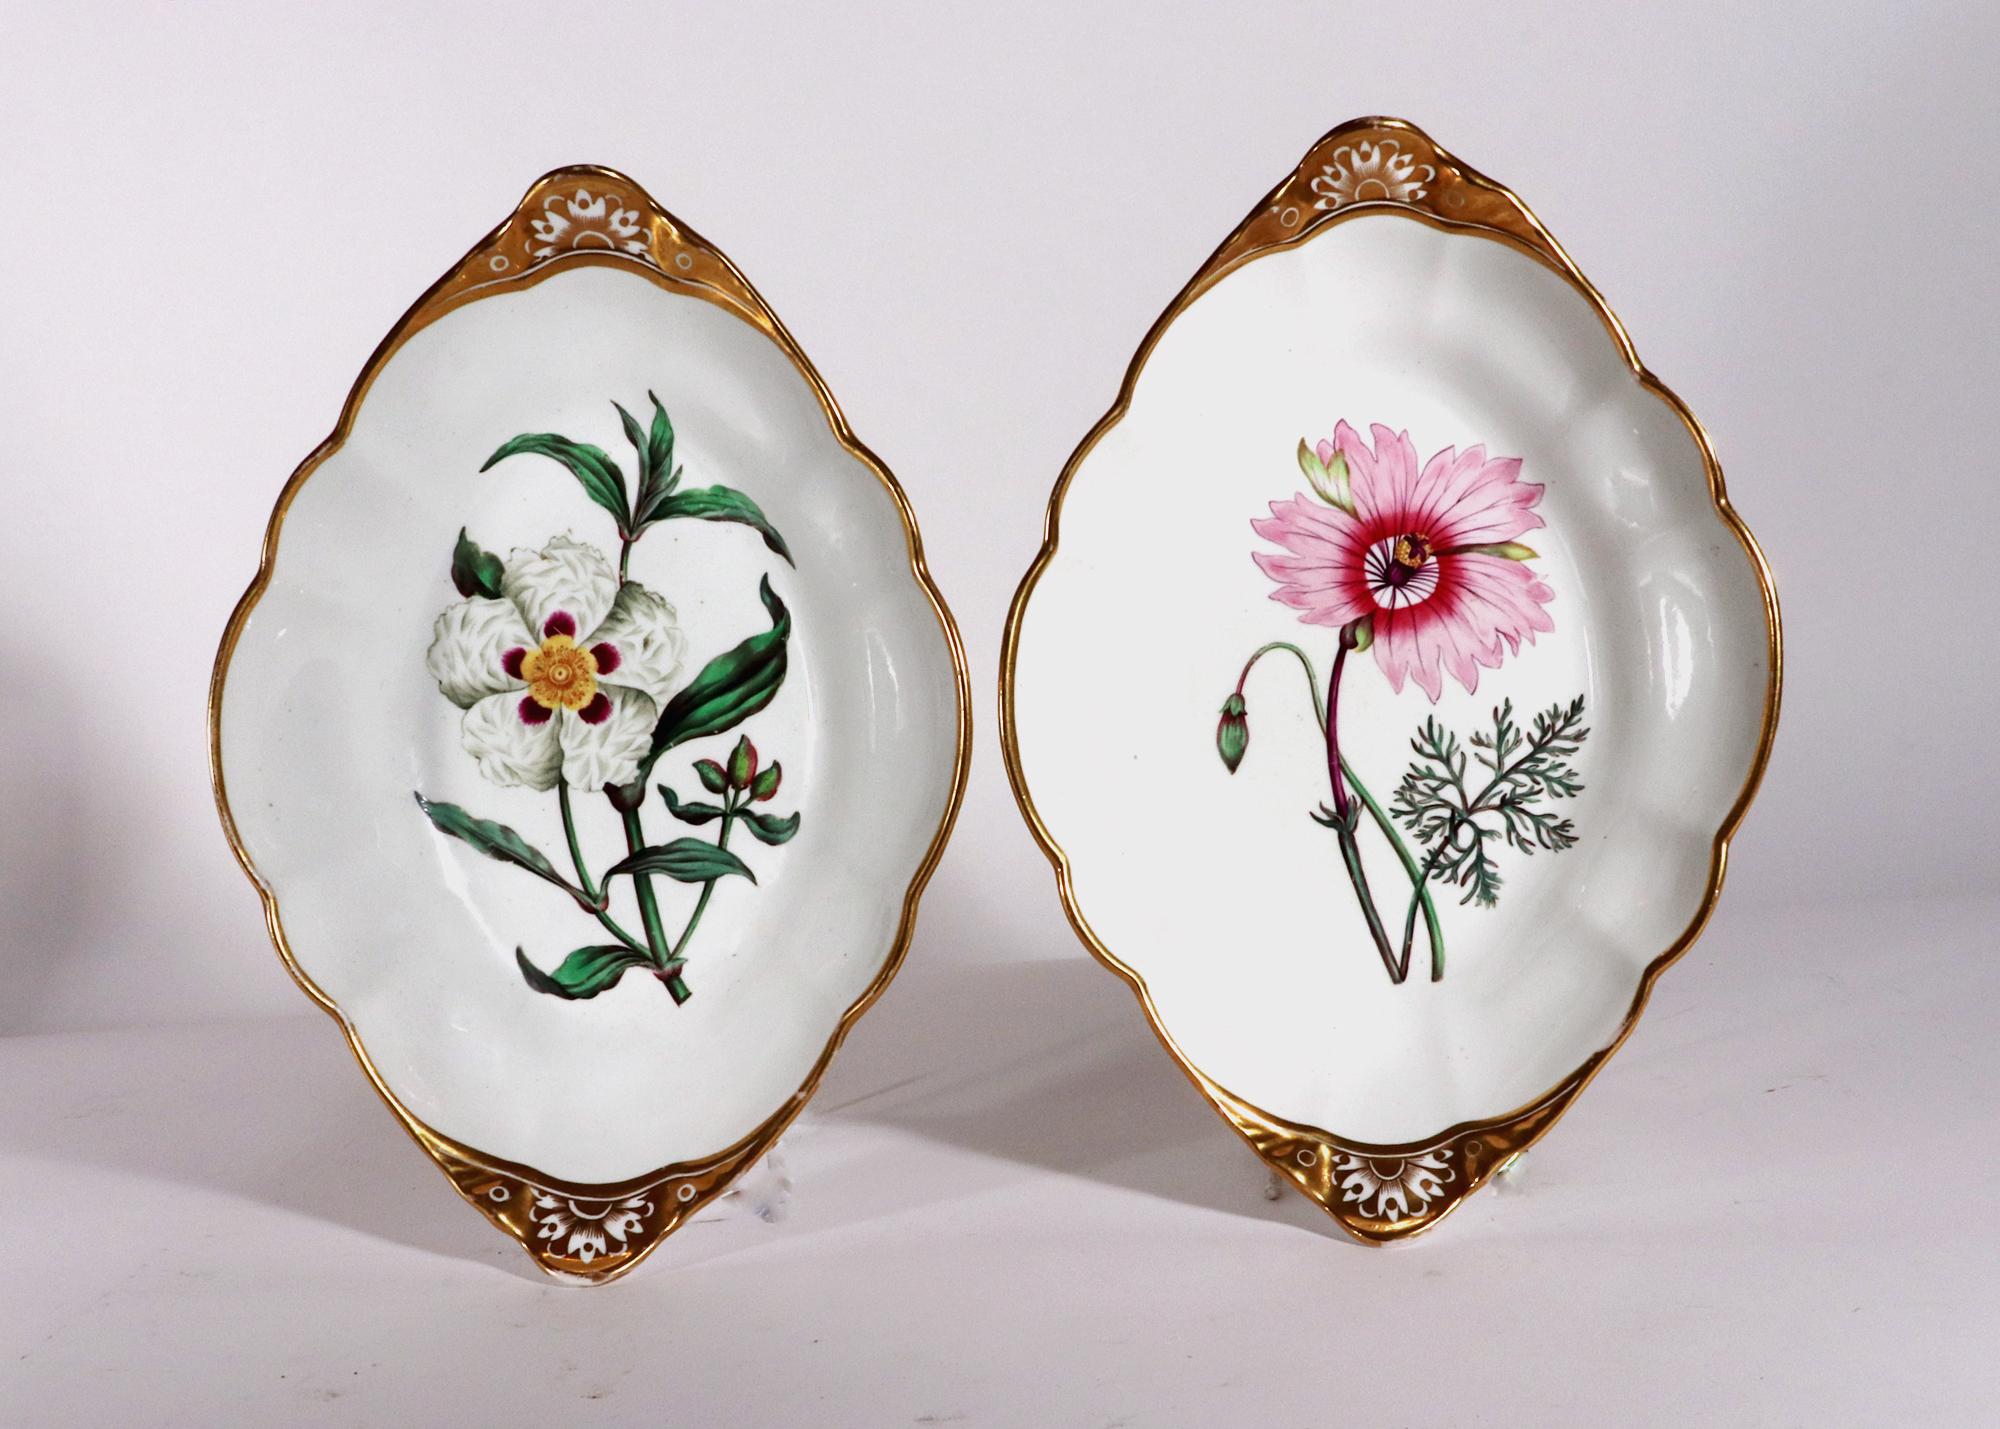 Spode Porcelain Botanical Named Specimen Dishes,
After William Curtis,
A Pair,
Circa 1810-20

A superb pair of Spode porcelain botanical dishes with a gilt border and to each end a raised shaped handle decorated with a flower head on a gilt ground.